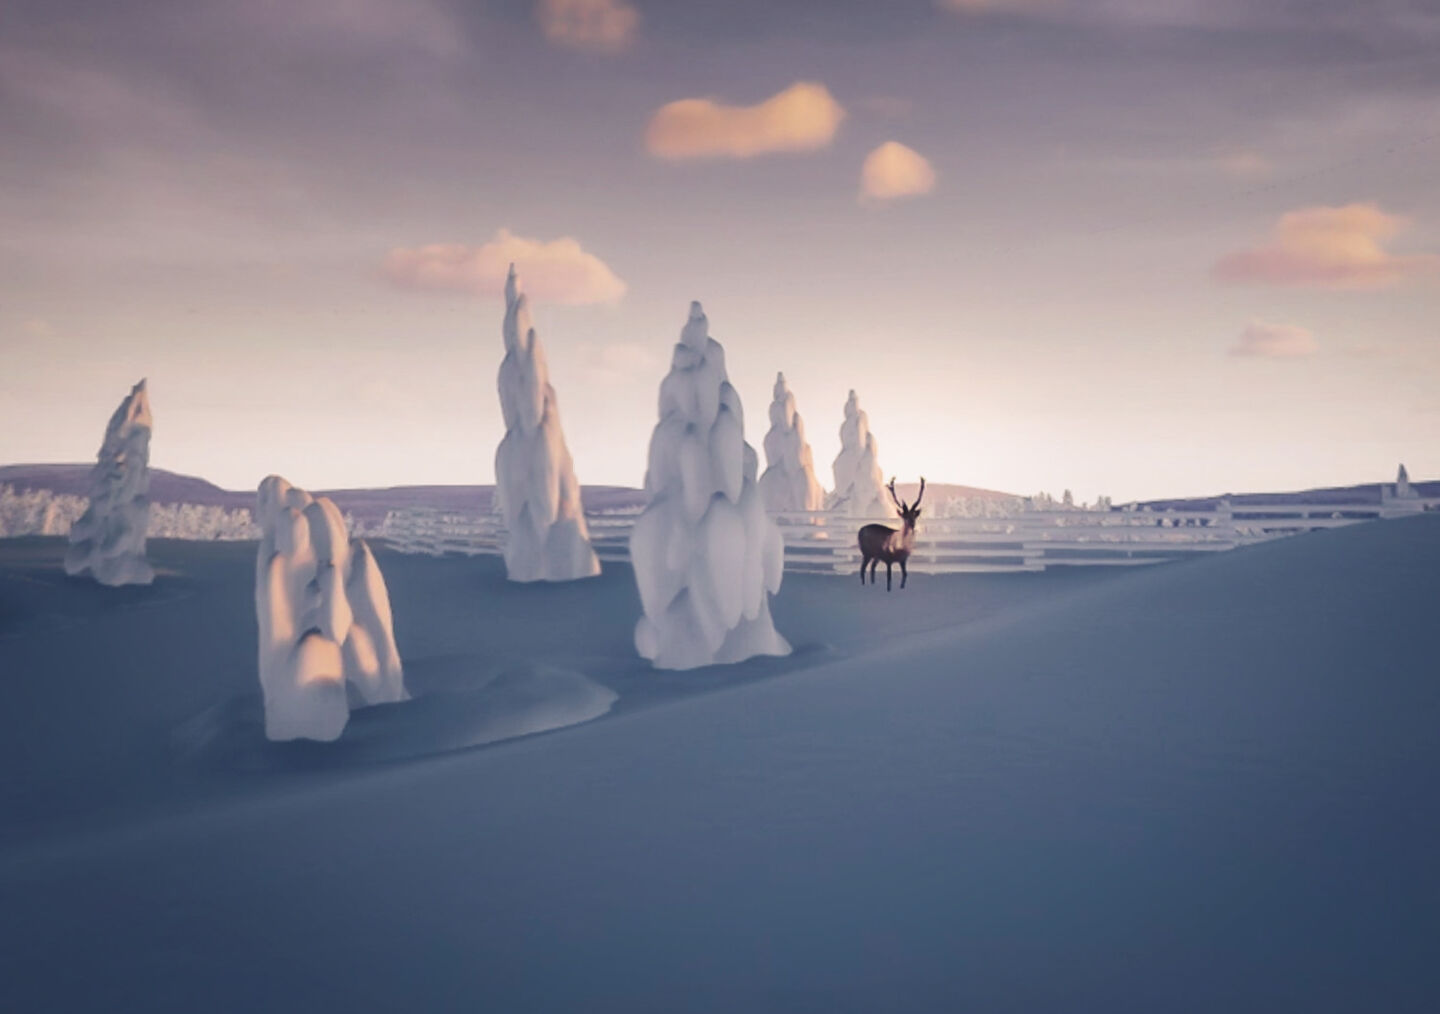 A fine winter day in Virtual Lapland